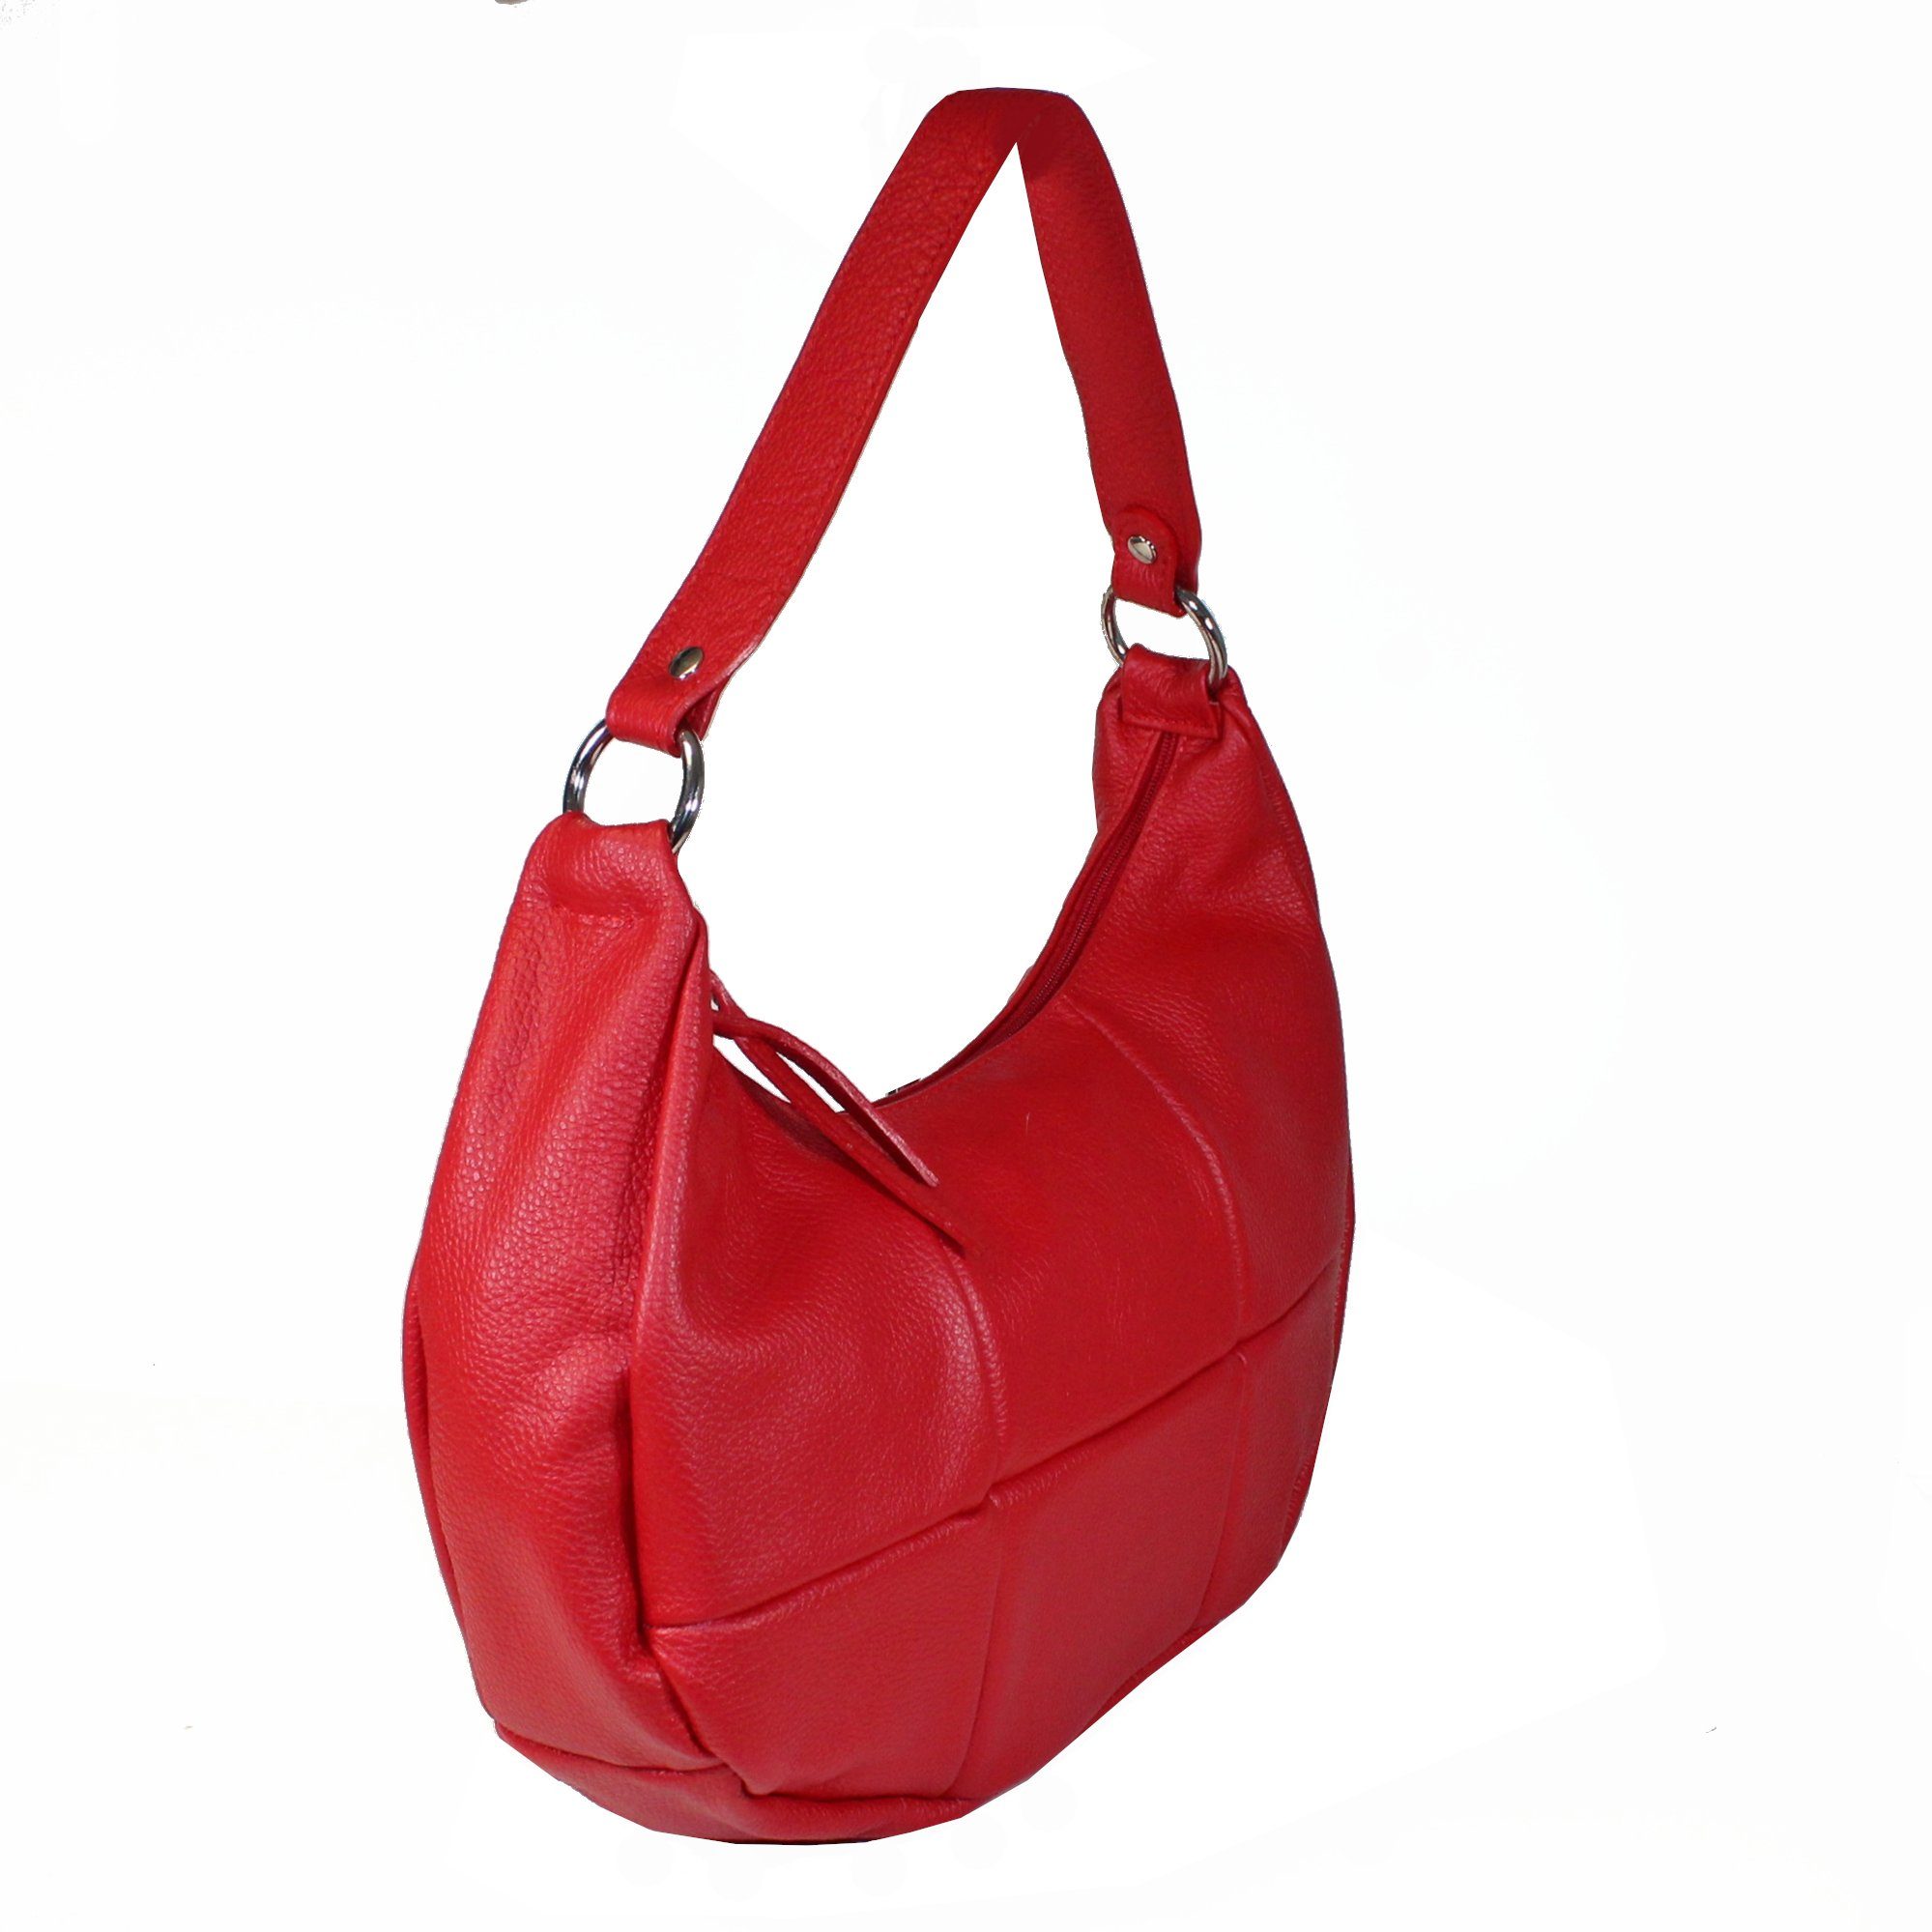 Made in fs-bags fs7219, Handtasche Rot Patchwork Optik, Italy